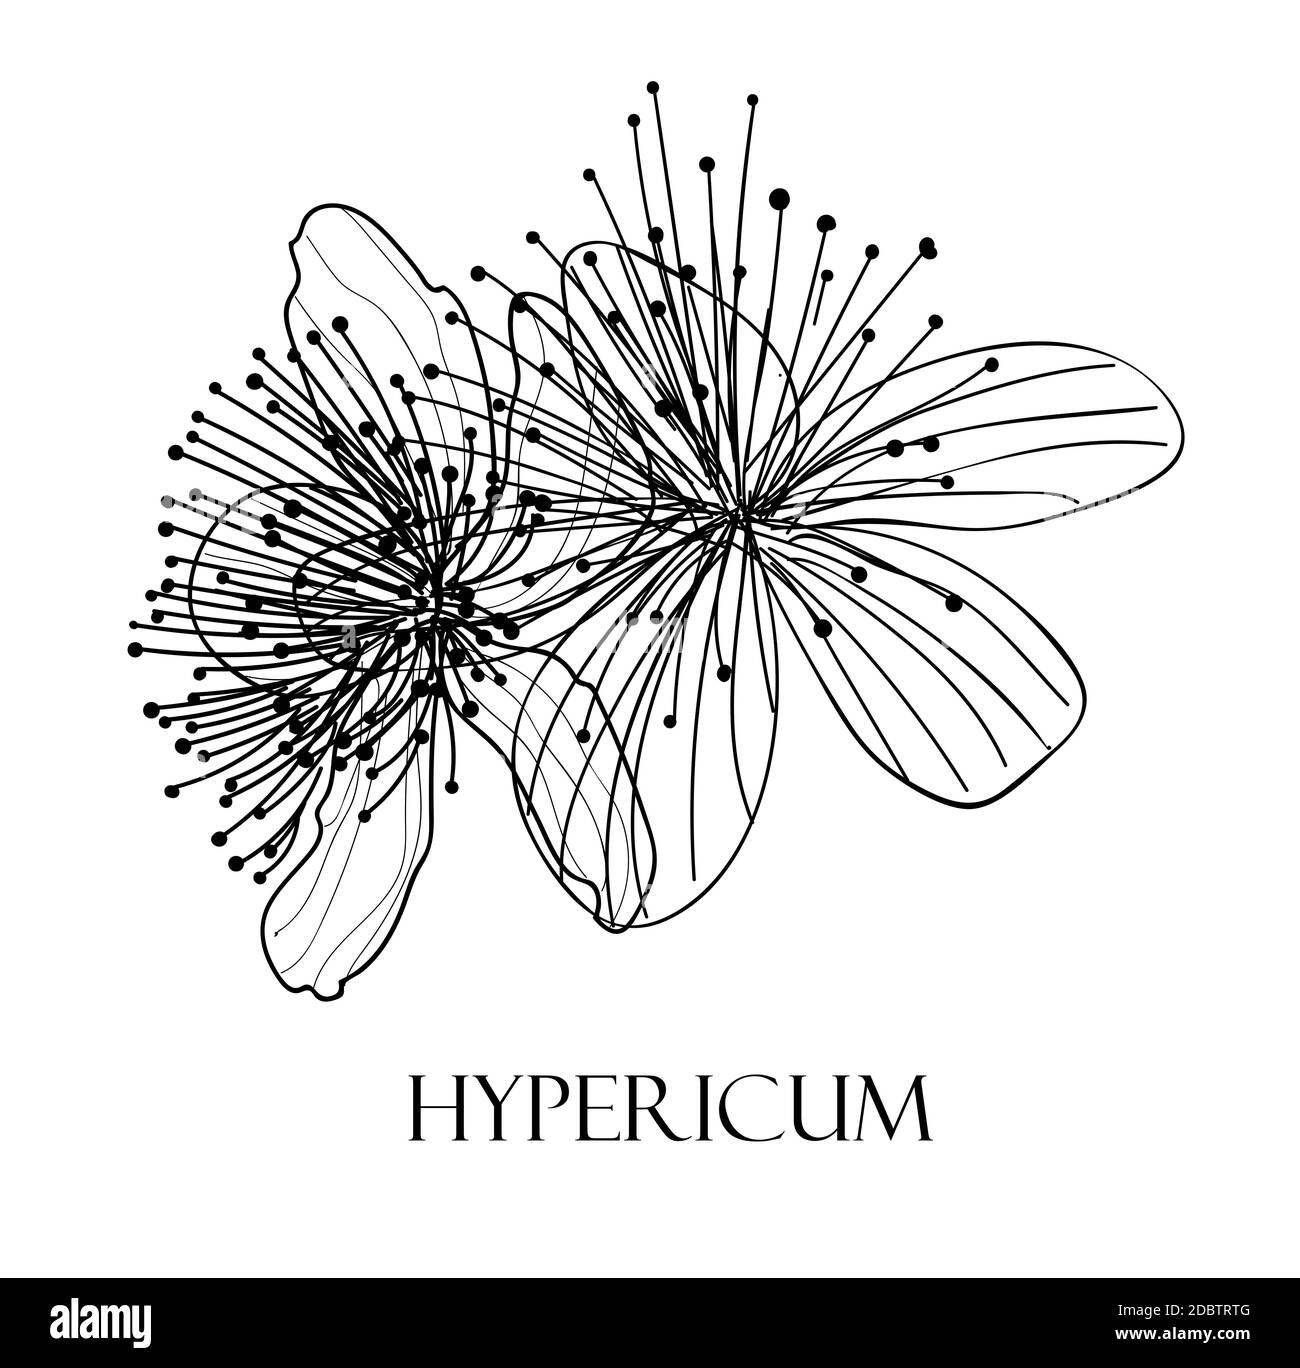 Hypericum Black and White Stock Photos & Images - Alamy